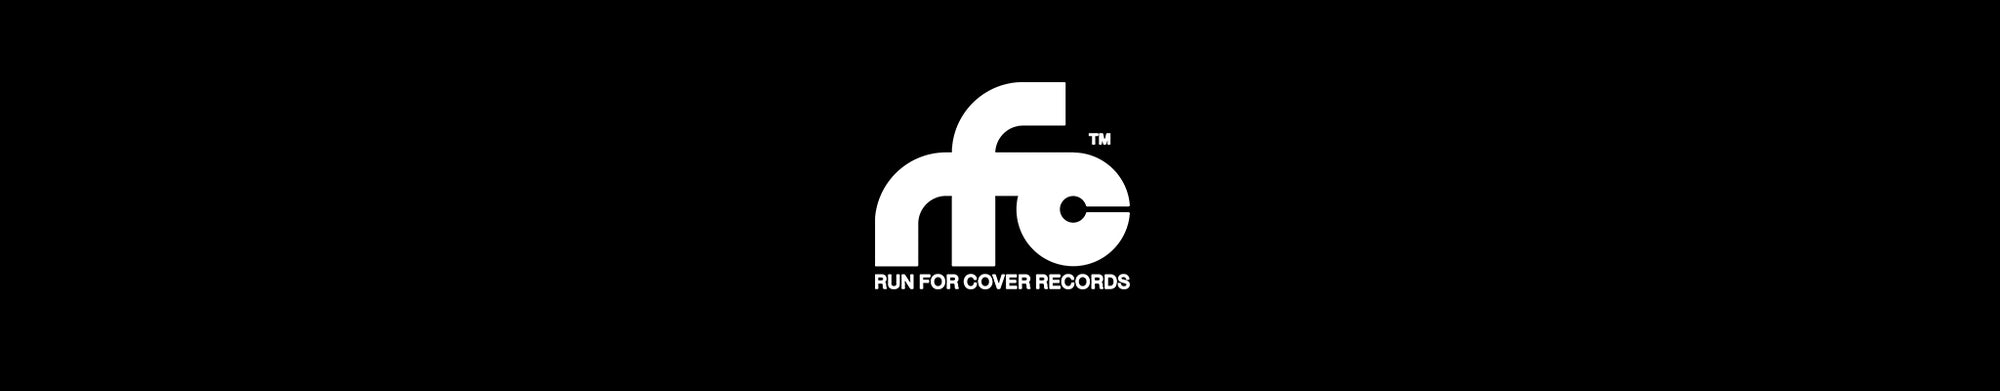 RUN FOR COVER RECORDS